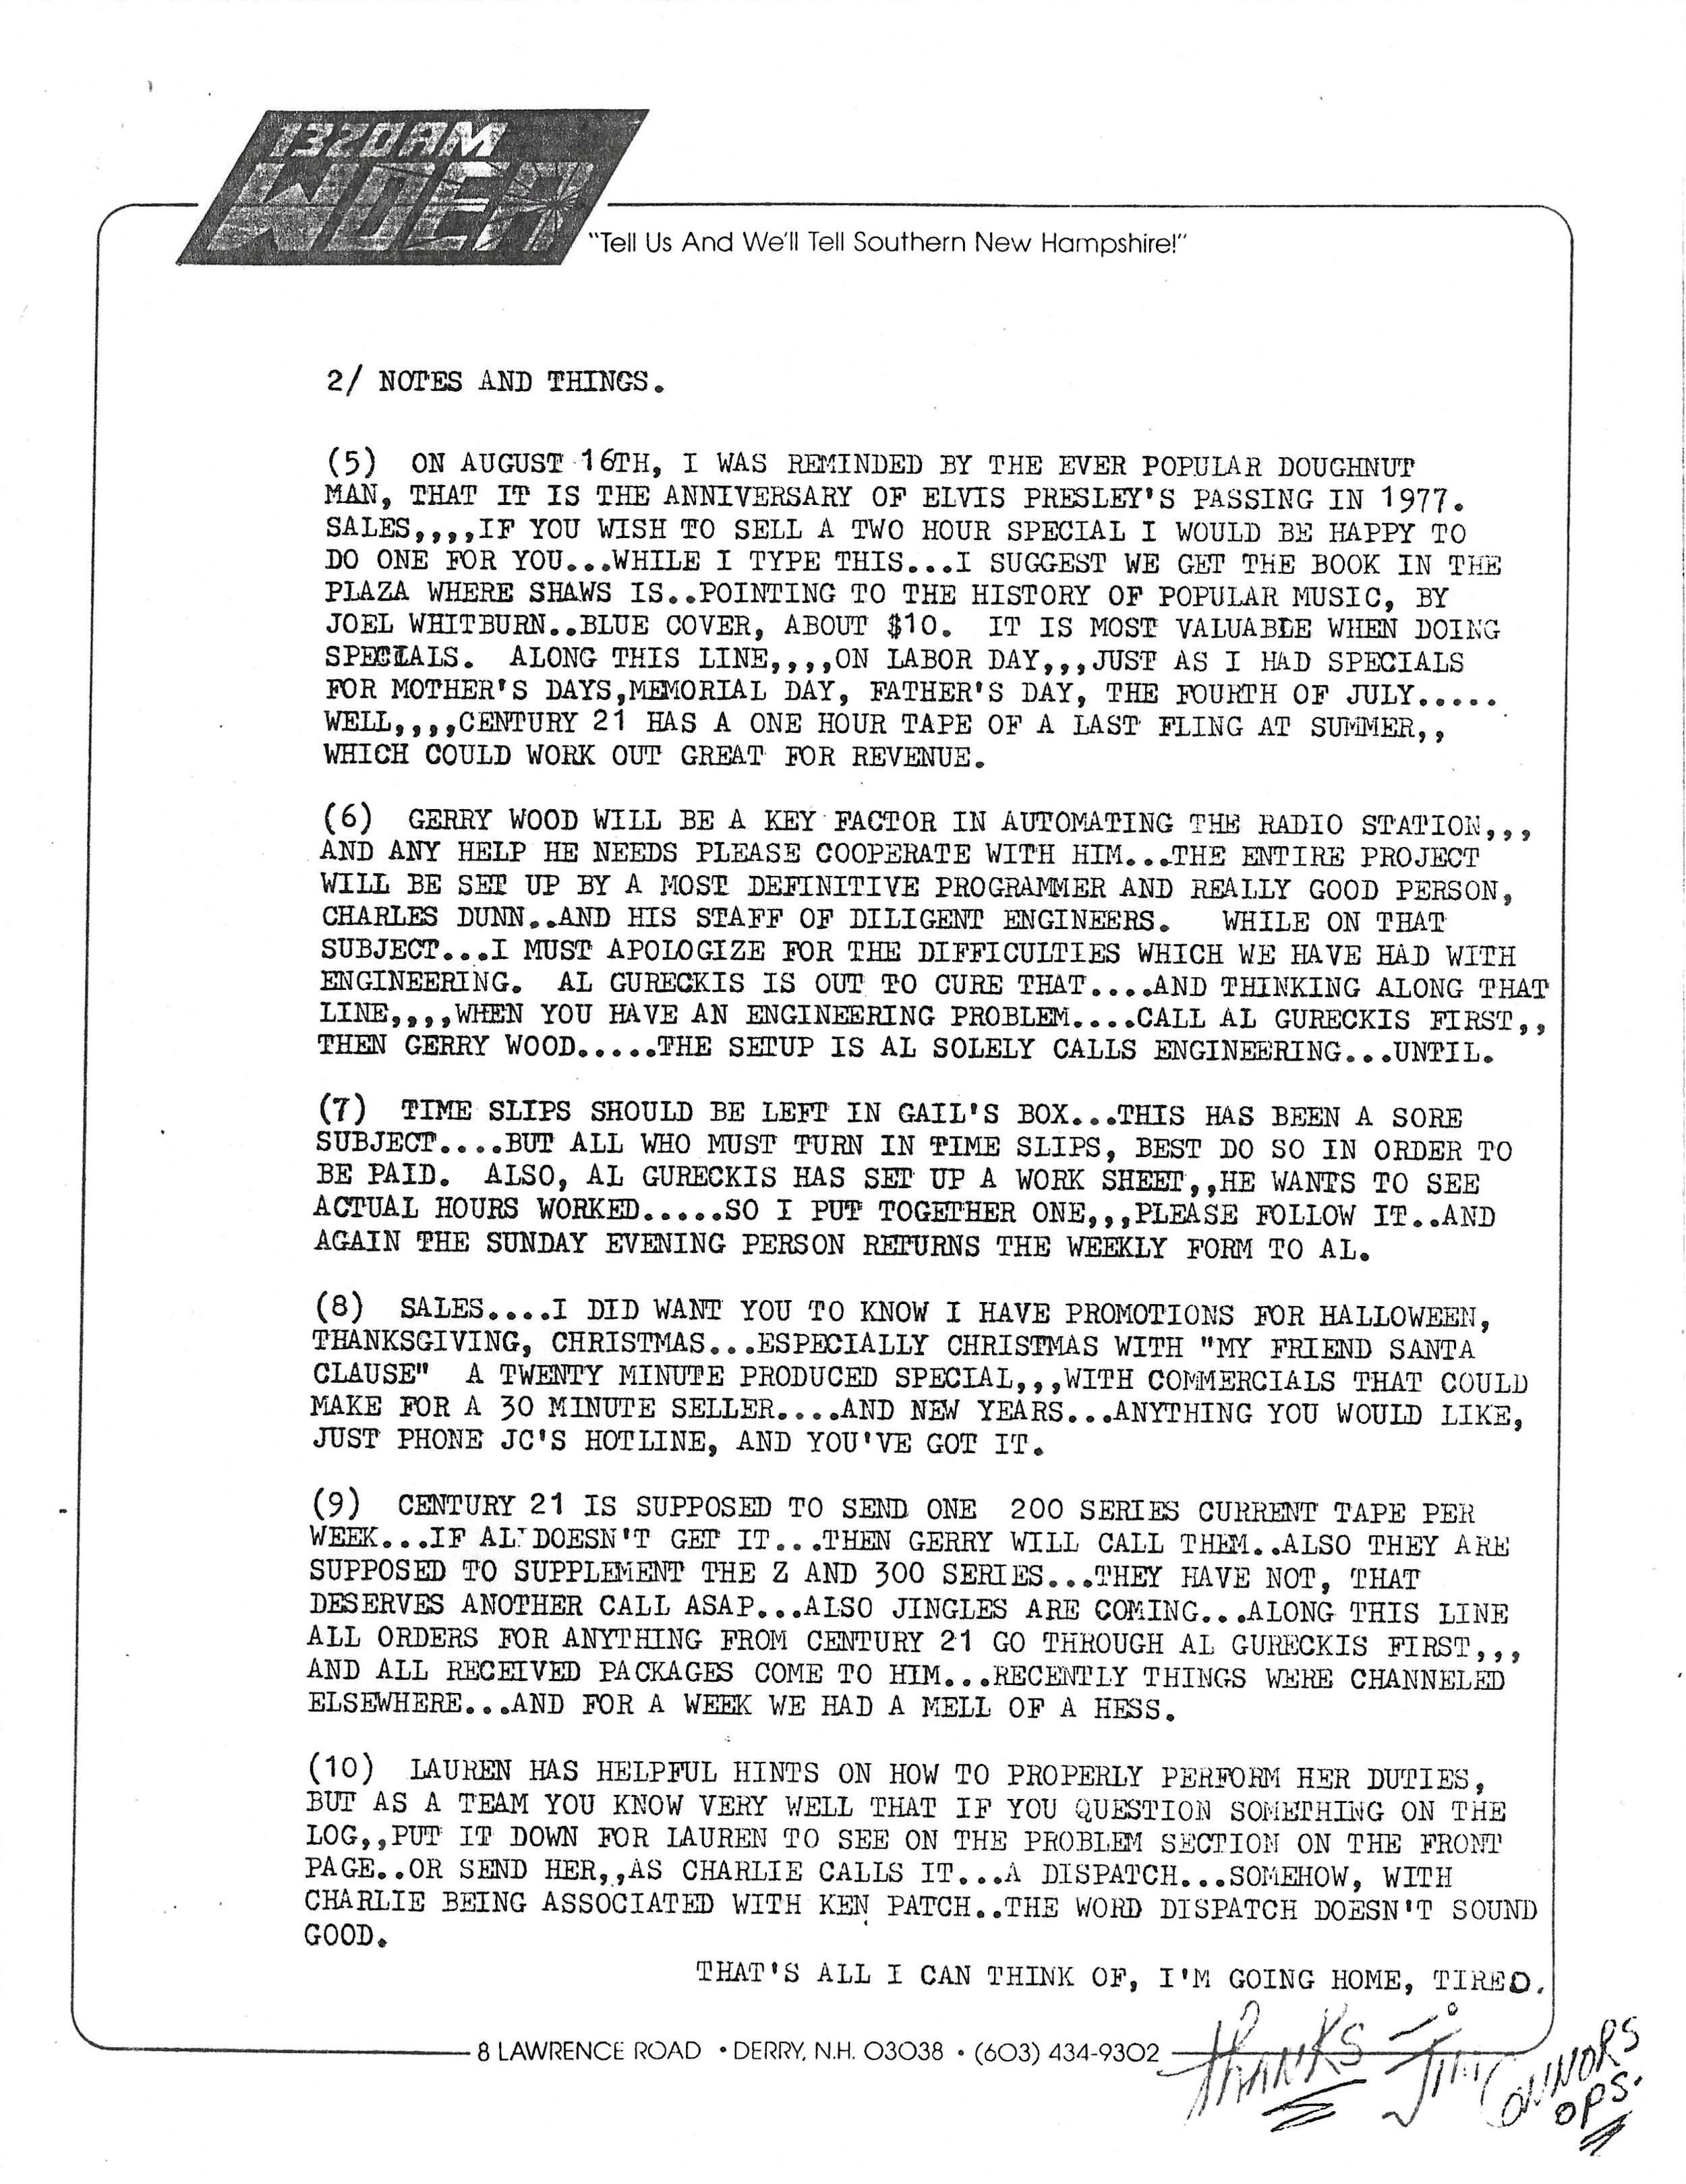 WDER staff letter 1985 Jim Connors